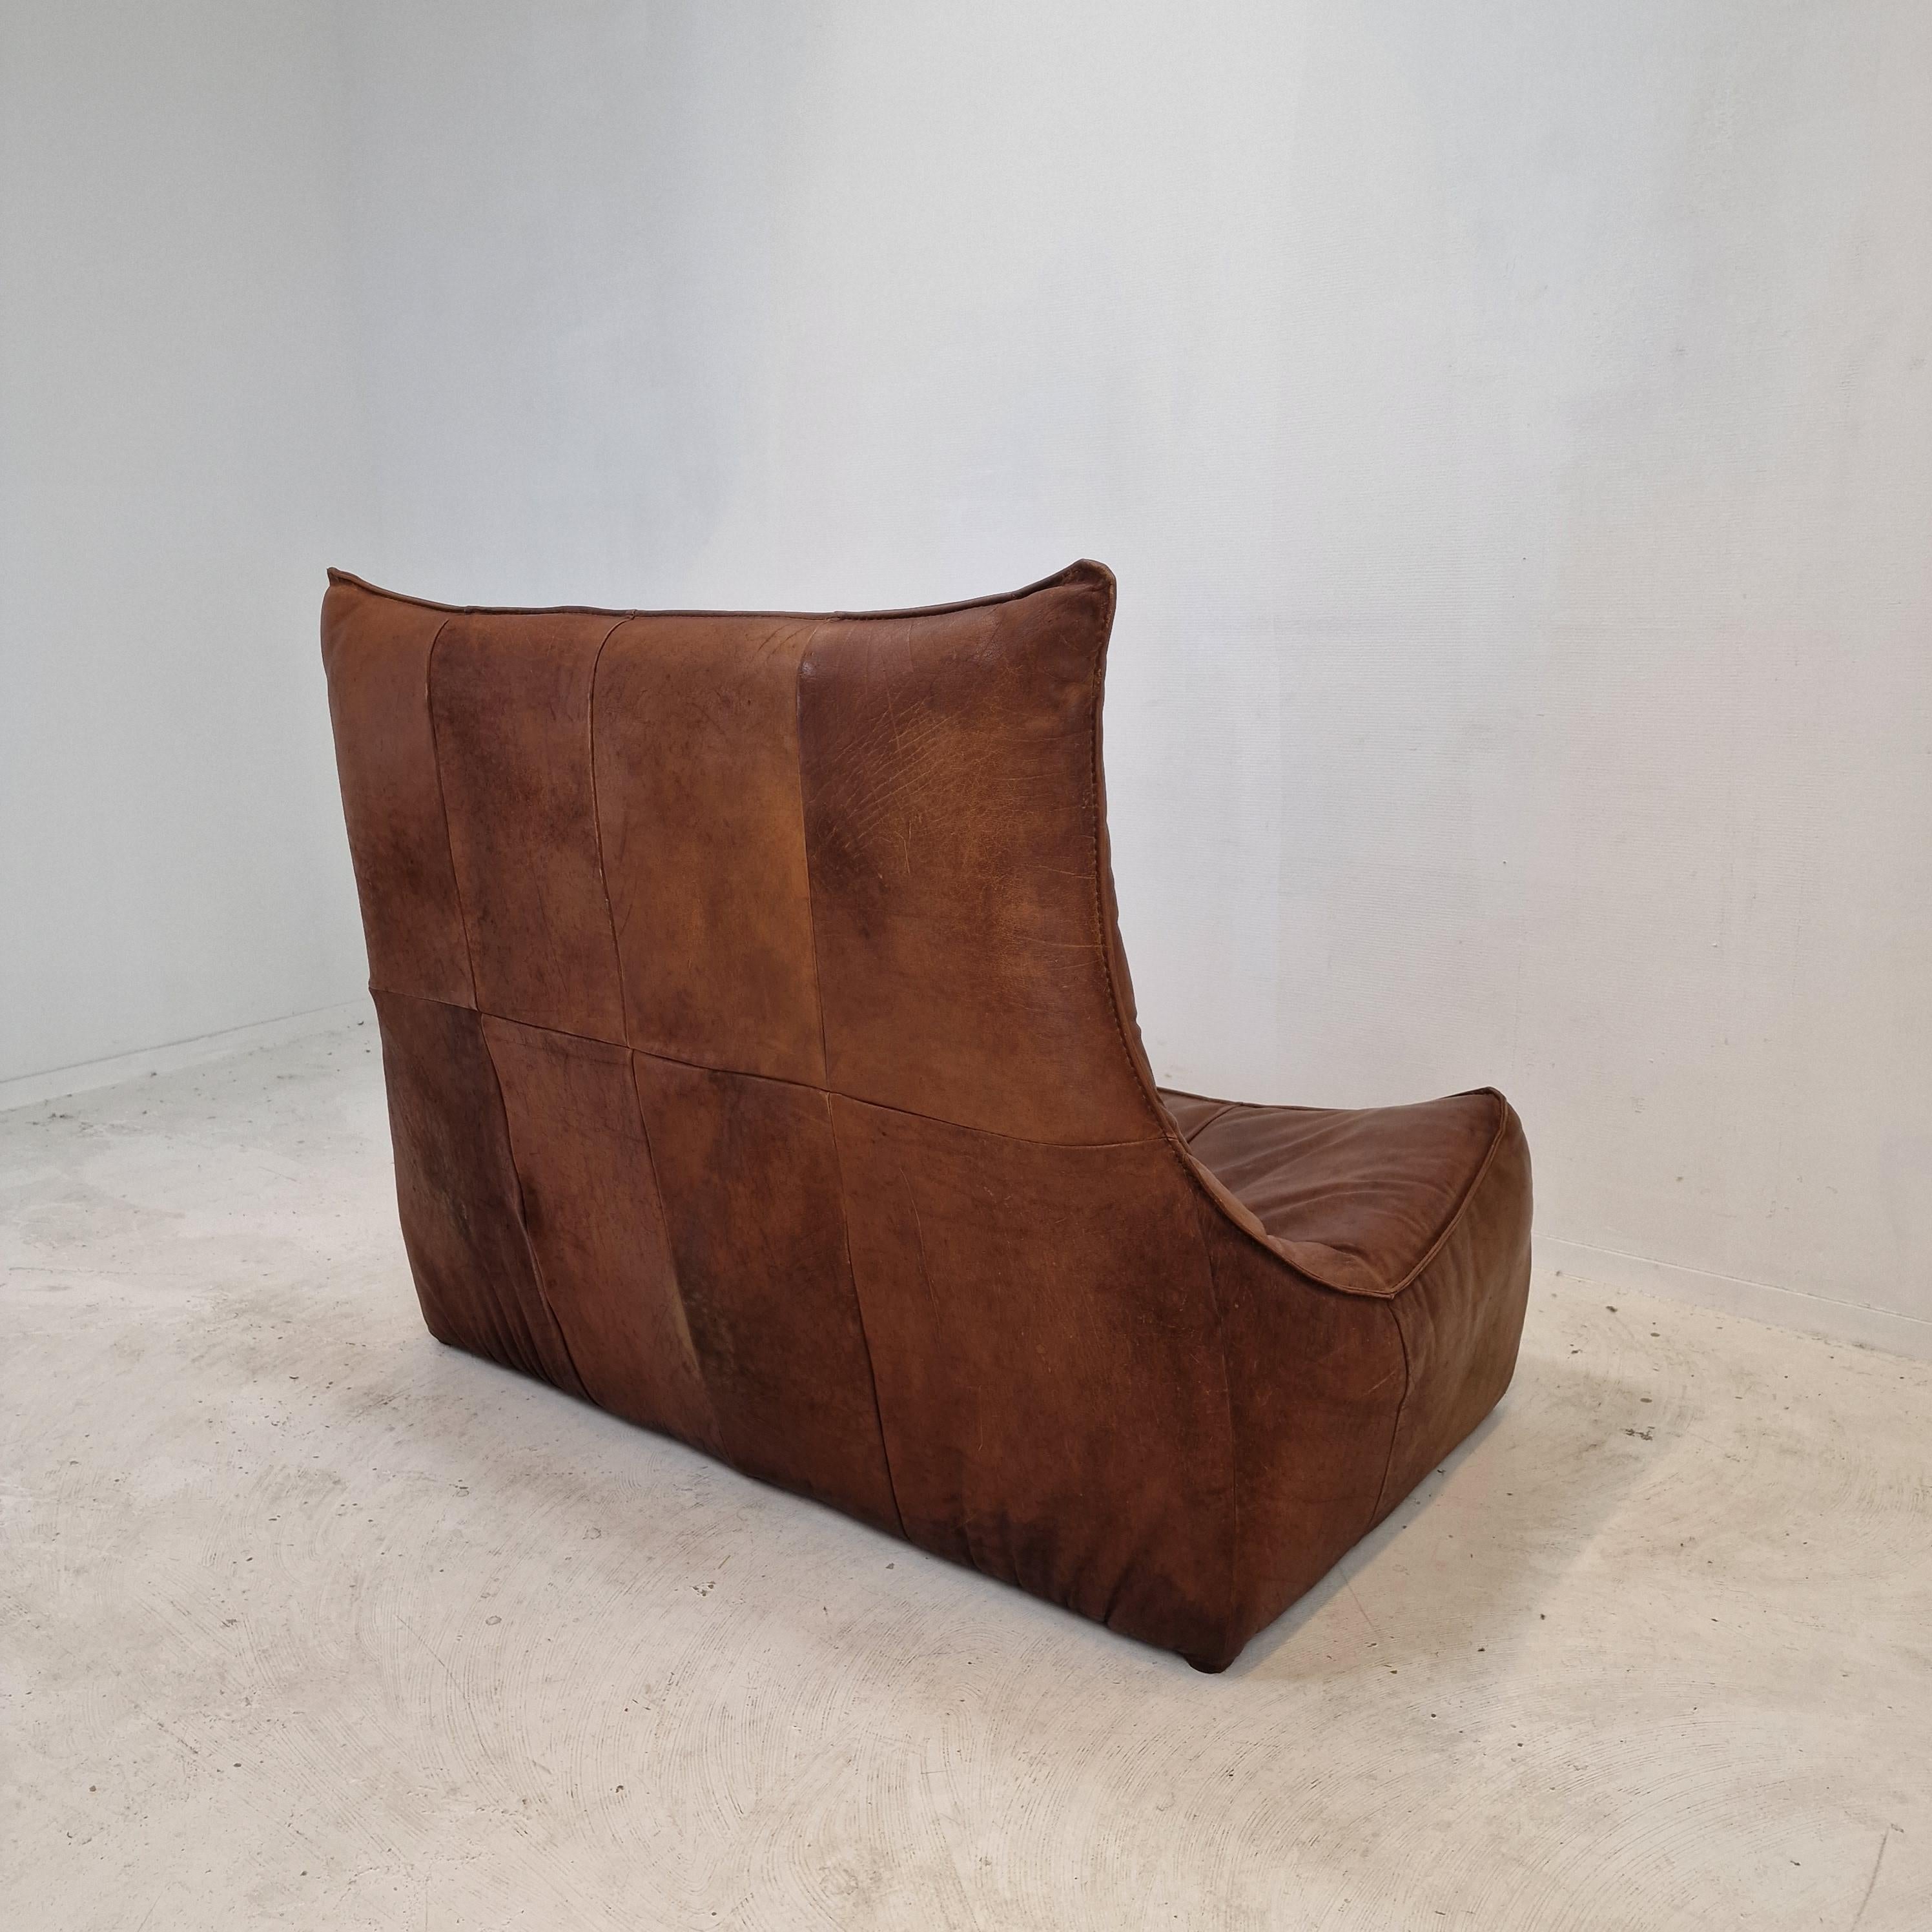 Montis “The Rock” Sofa In Brown Leather By Gerard Van Den Berg, 1970s For Sale 6